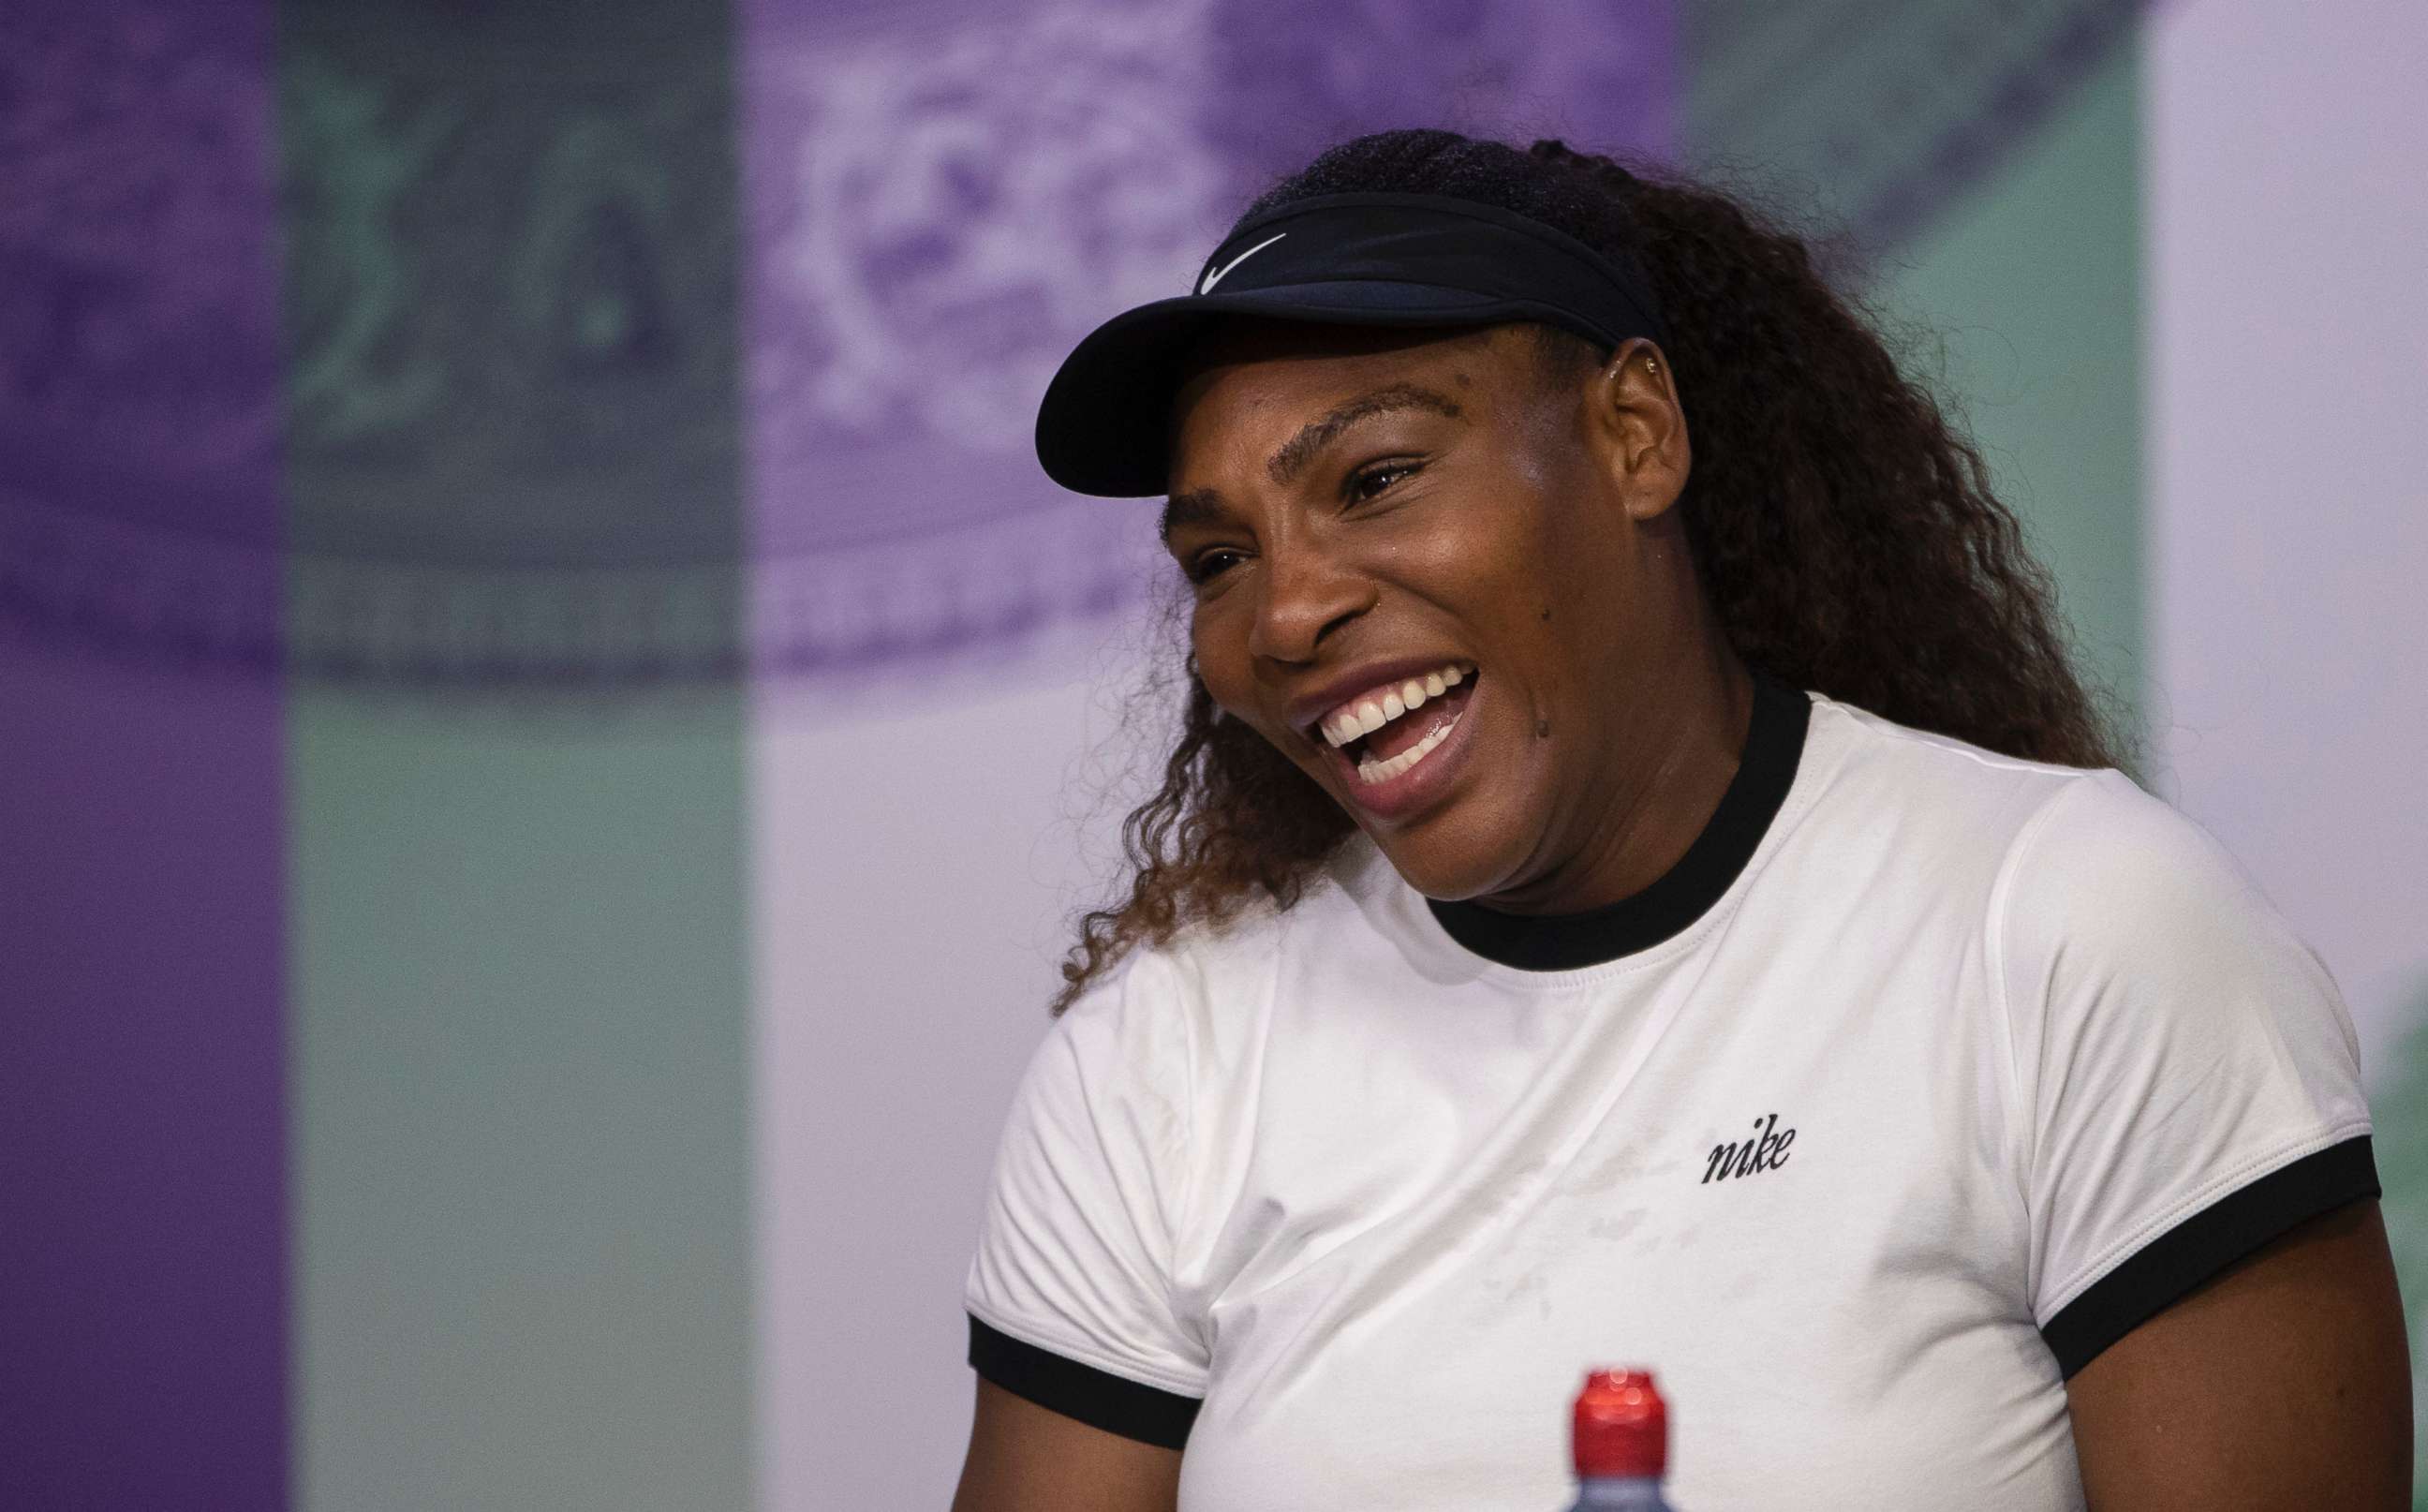 PHOTO: Serena Williams reacts during a press conference ahead of the Wimbledon Tennis Championships in London, July 1, 2018.